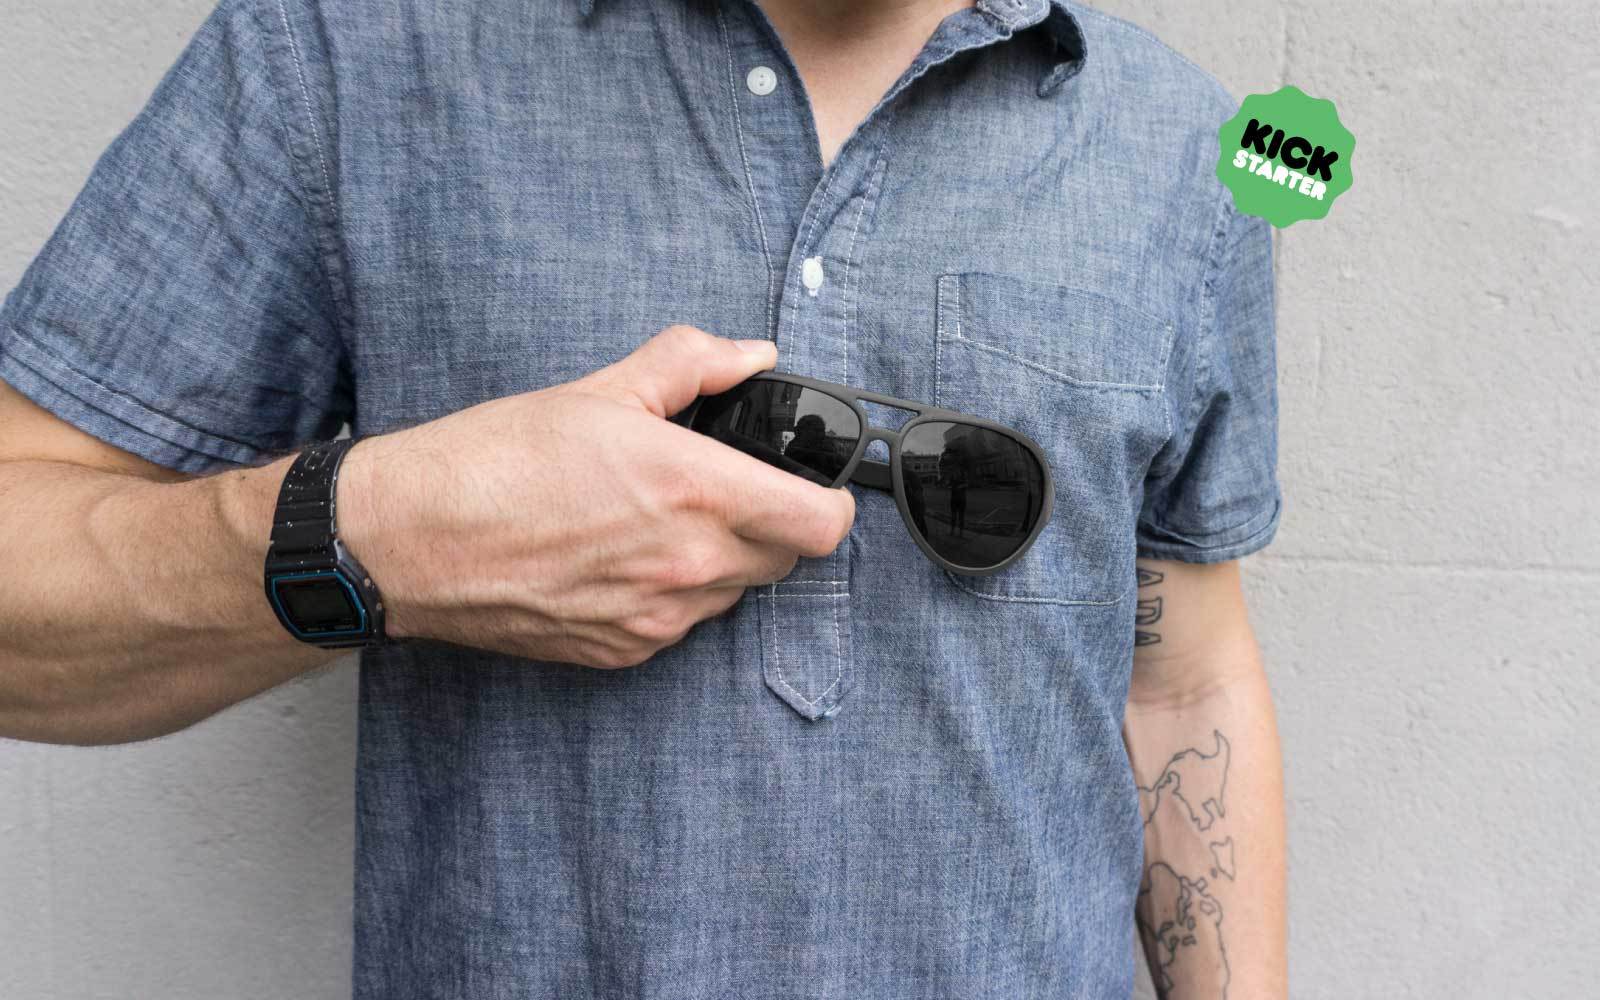 Want MagLock Sunglasses, But Missed the Kickstarter?